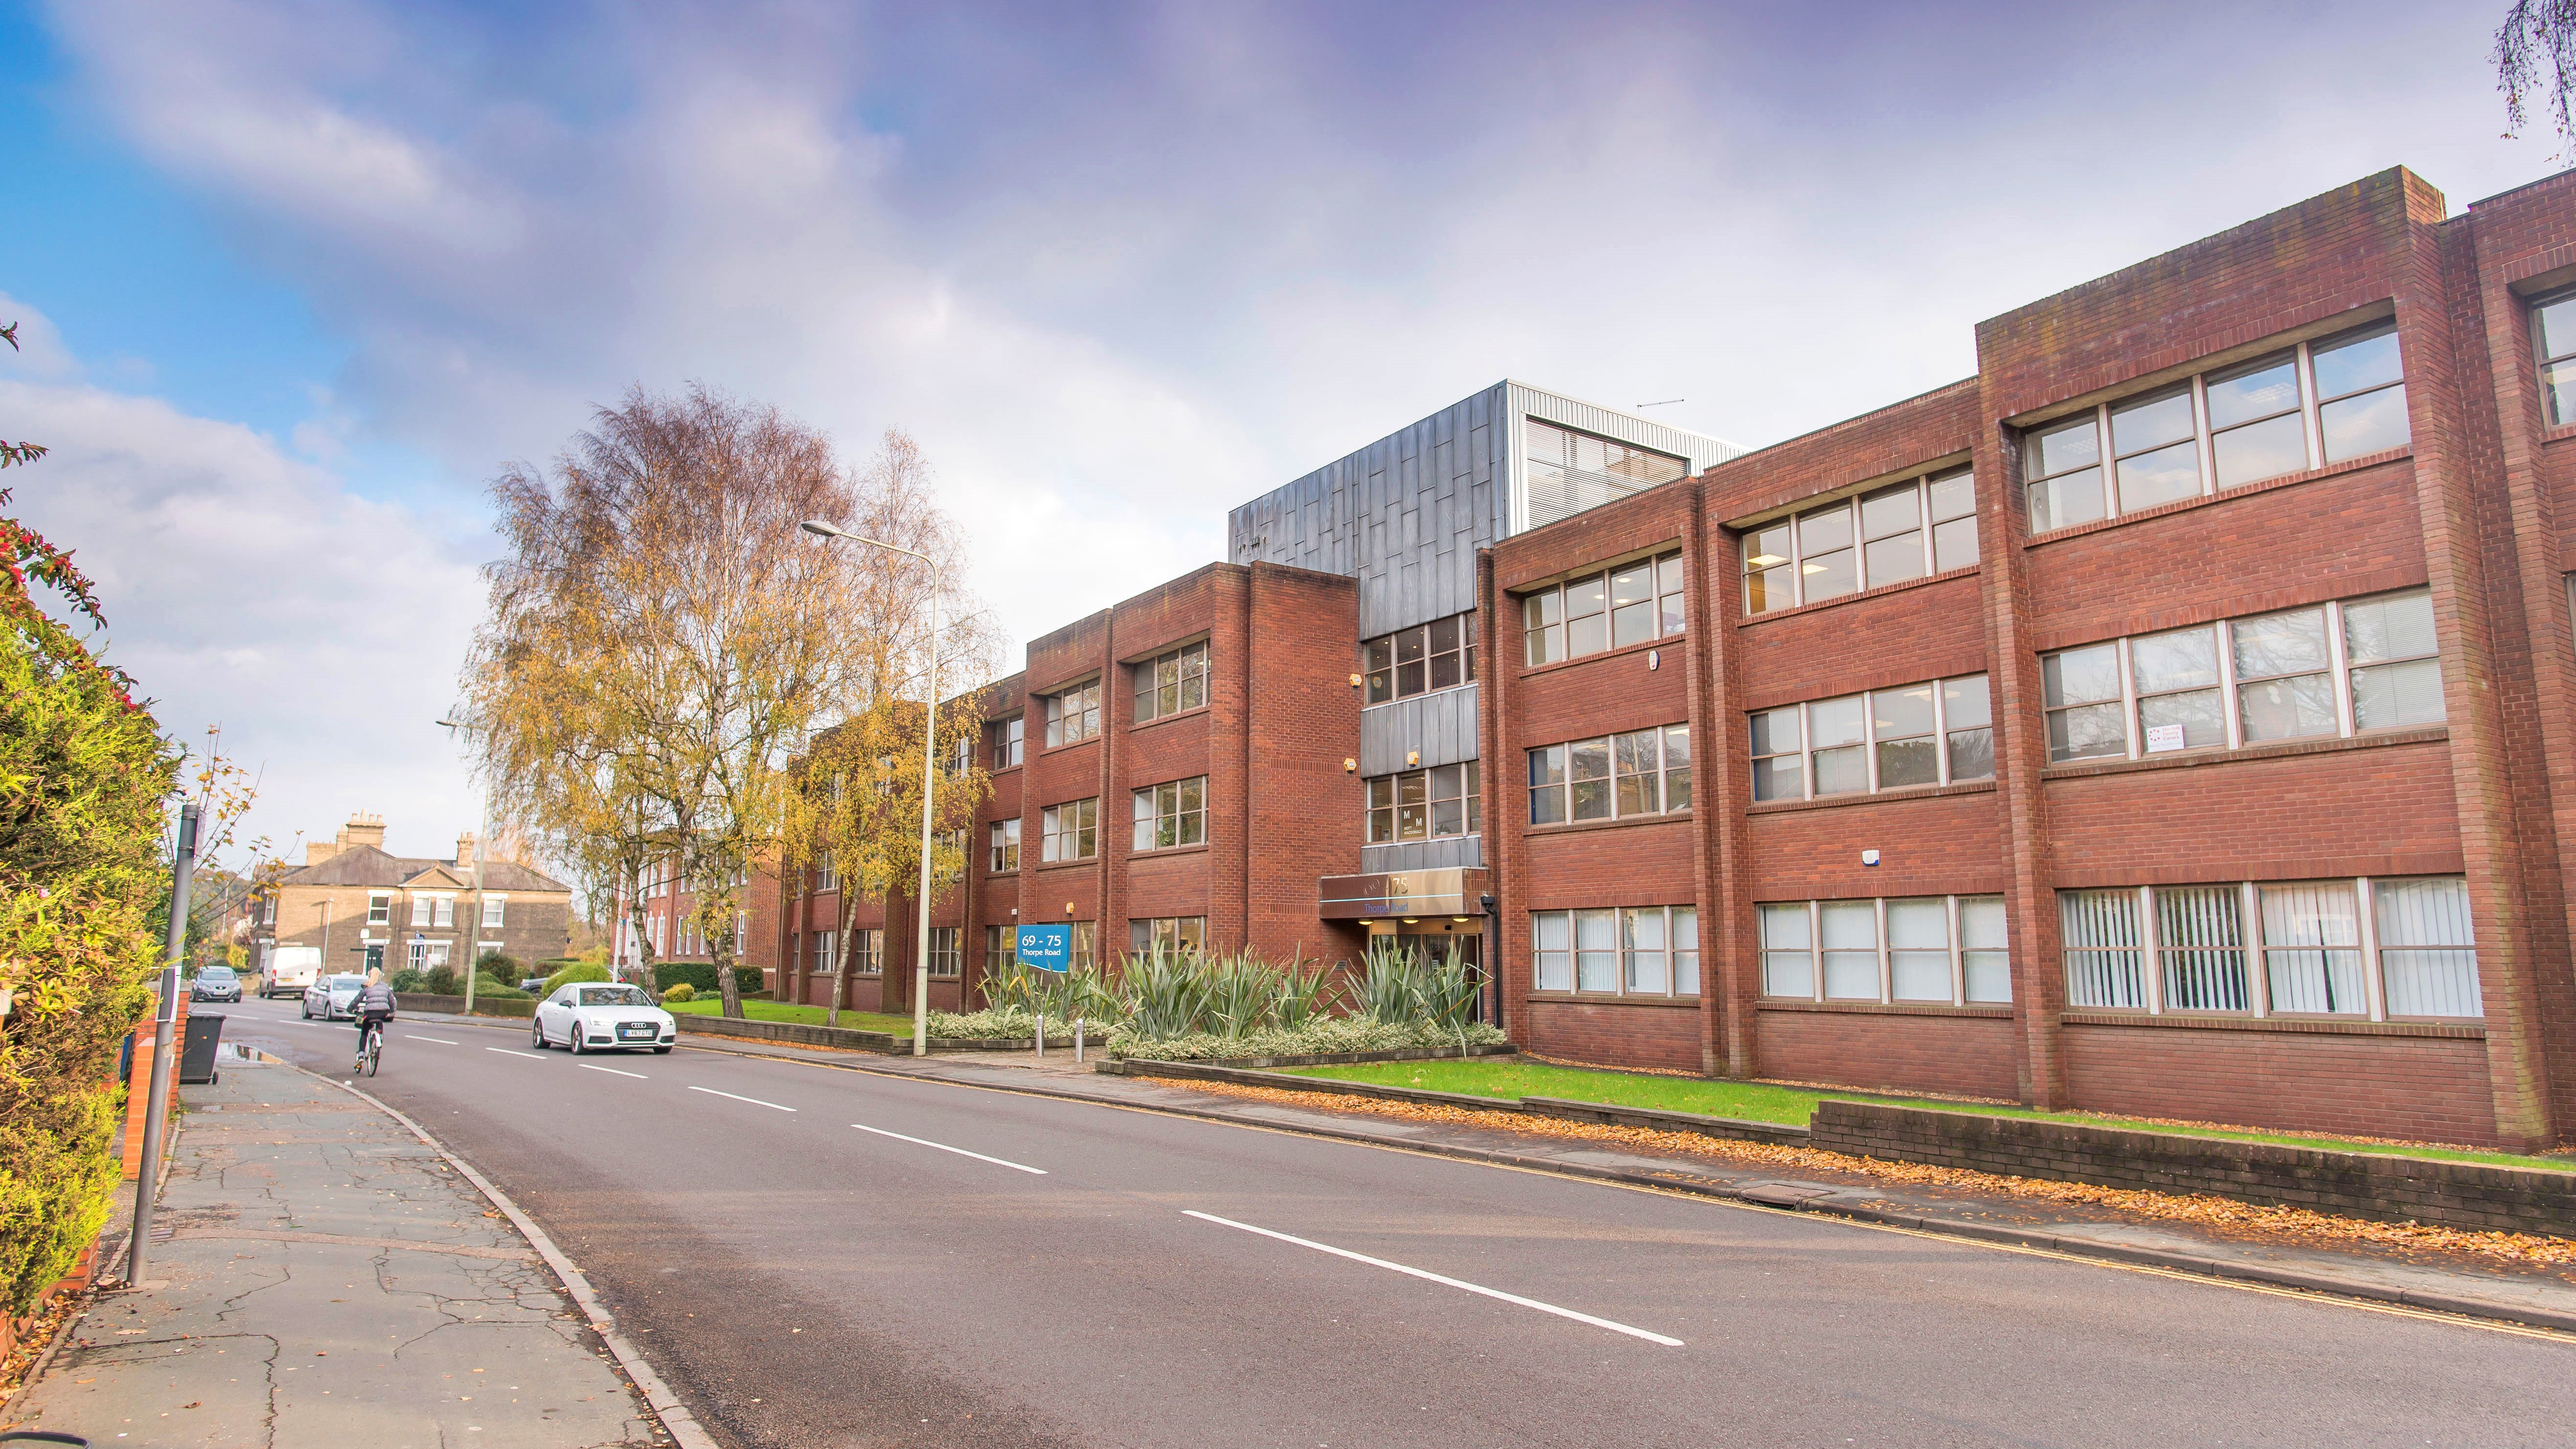 Sale of freehold multi let office investment